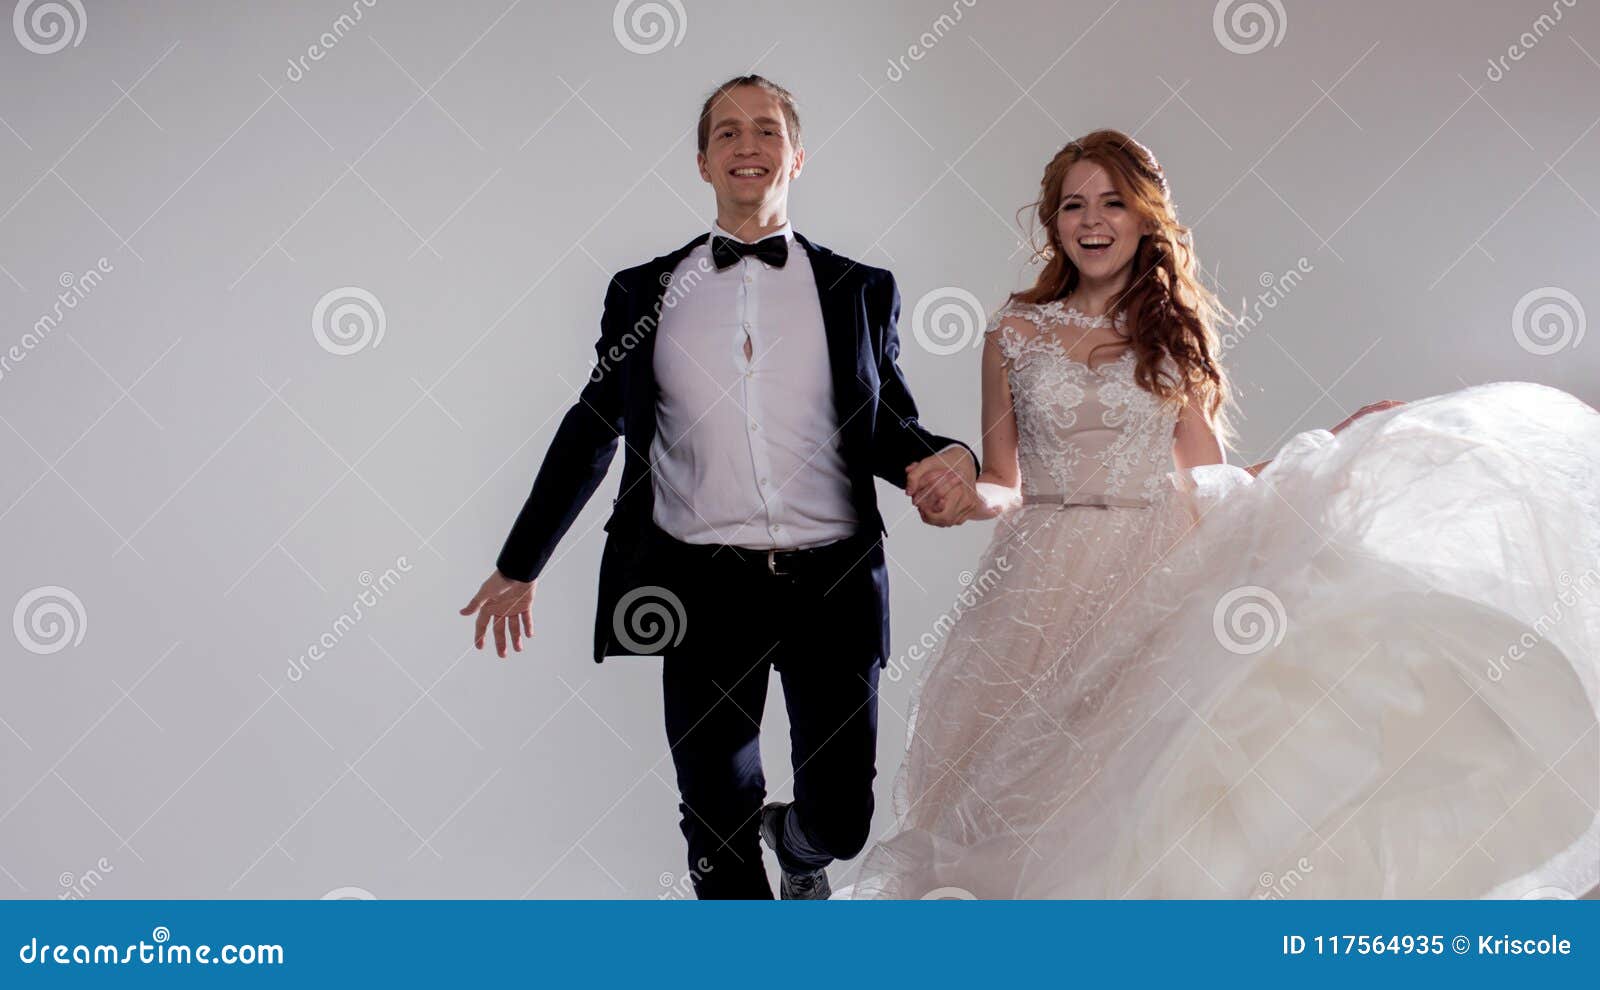 Funny and Happy Bride and Groom, Dance and Jump with Happiness, Married.  Studio Portrait, Light Background Stock Image - Image of dance, positive:  117564935